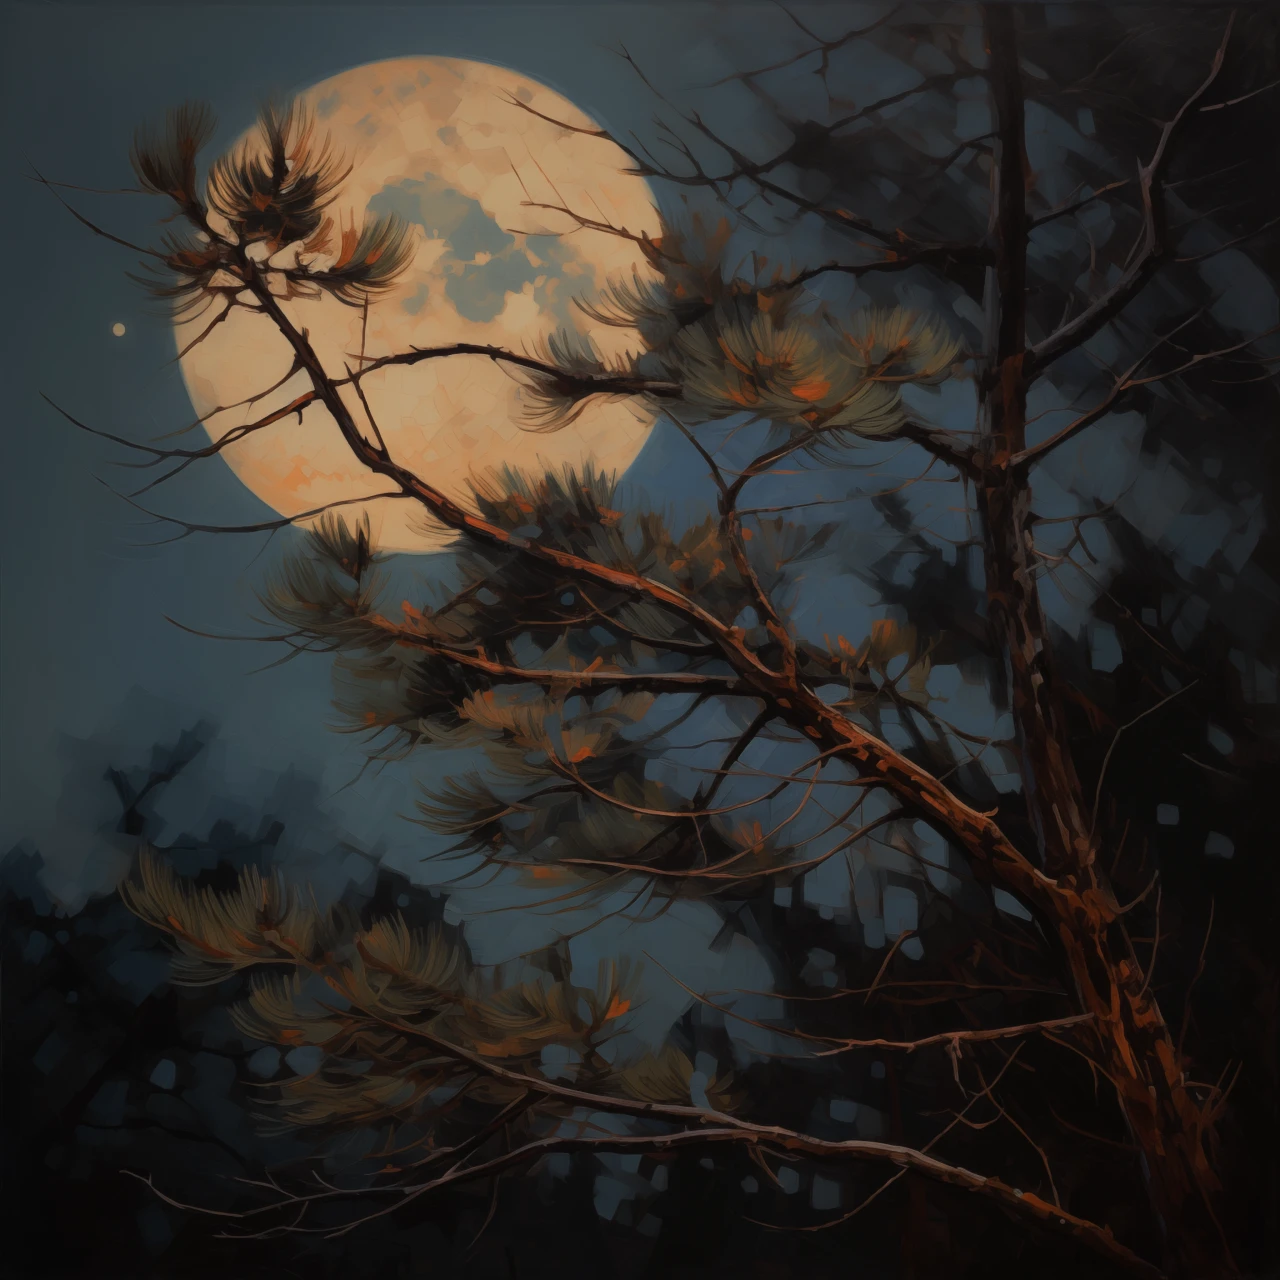 An impressionist style painting of a pine tree limb in front of a large moon